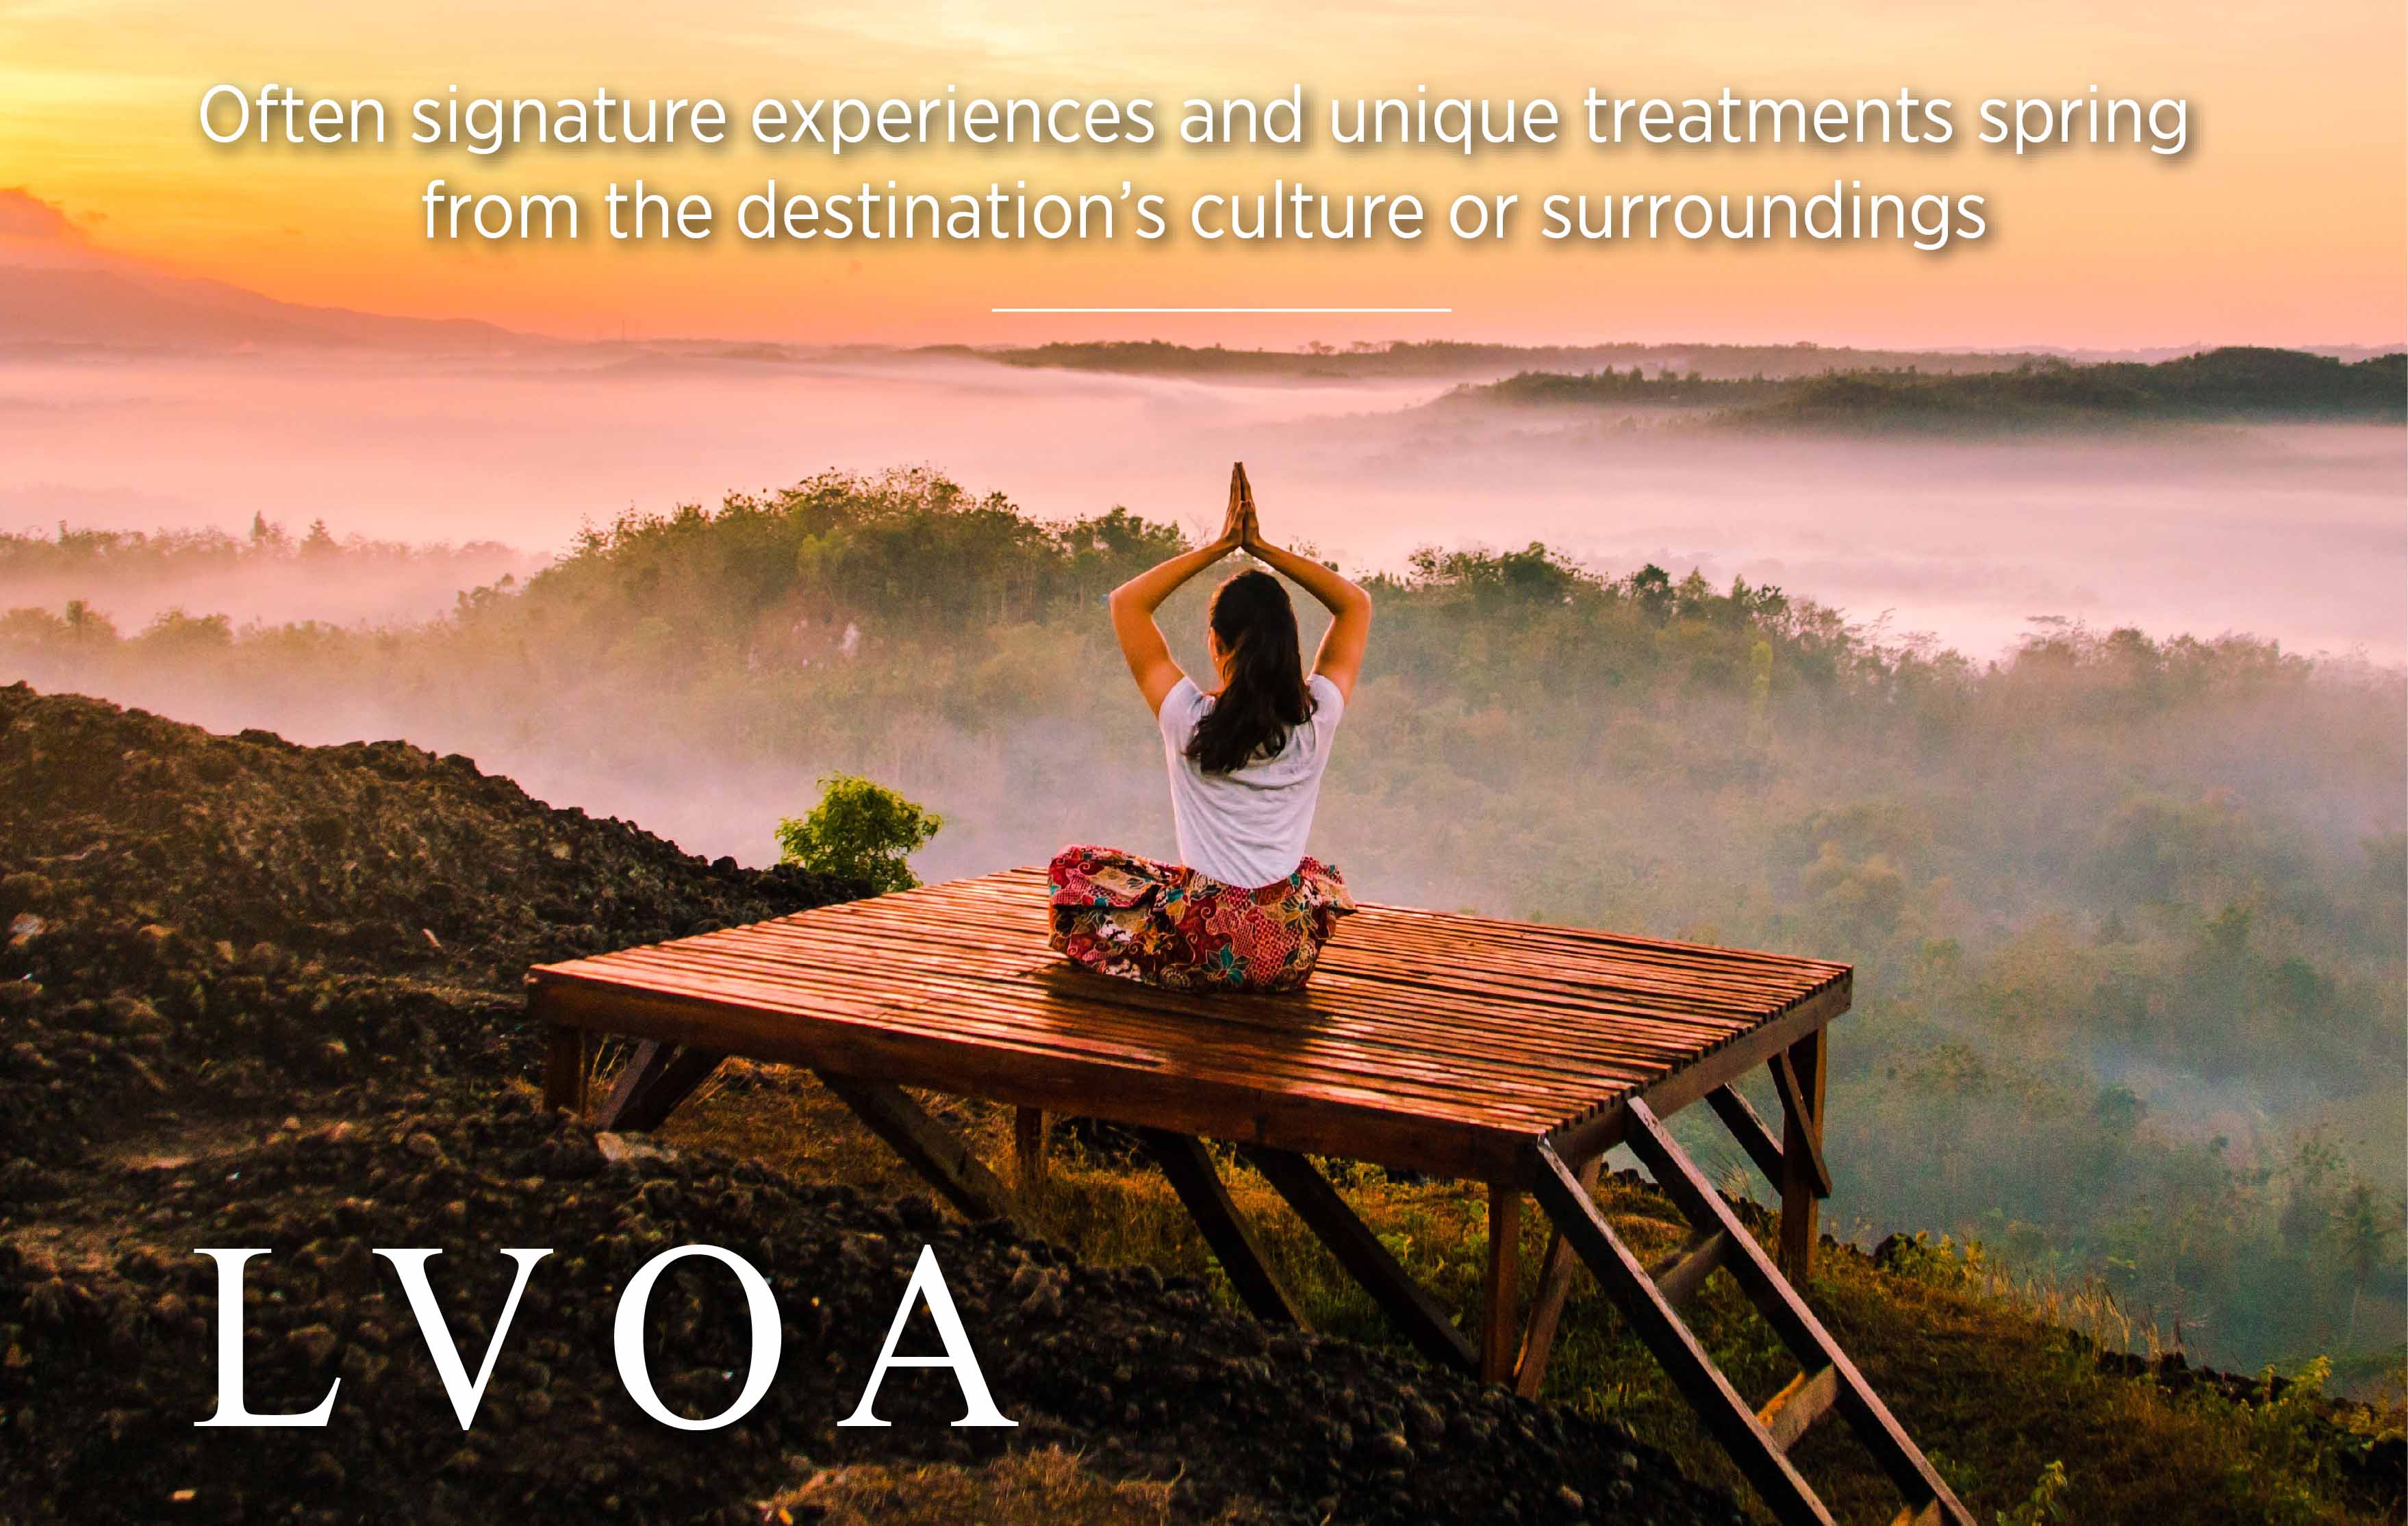 Often-signature-experiences-and-unique-treatments-spring-from-the-destination’s-culture-orsurroundings_LVO_Associate